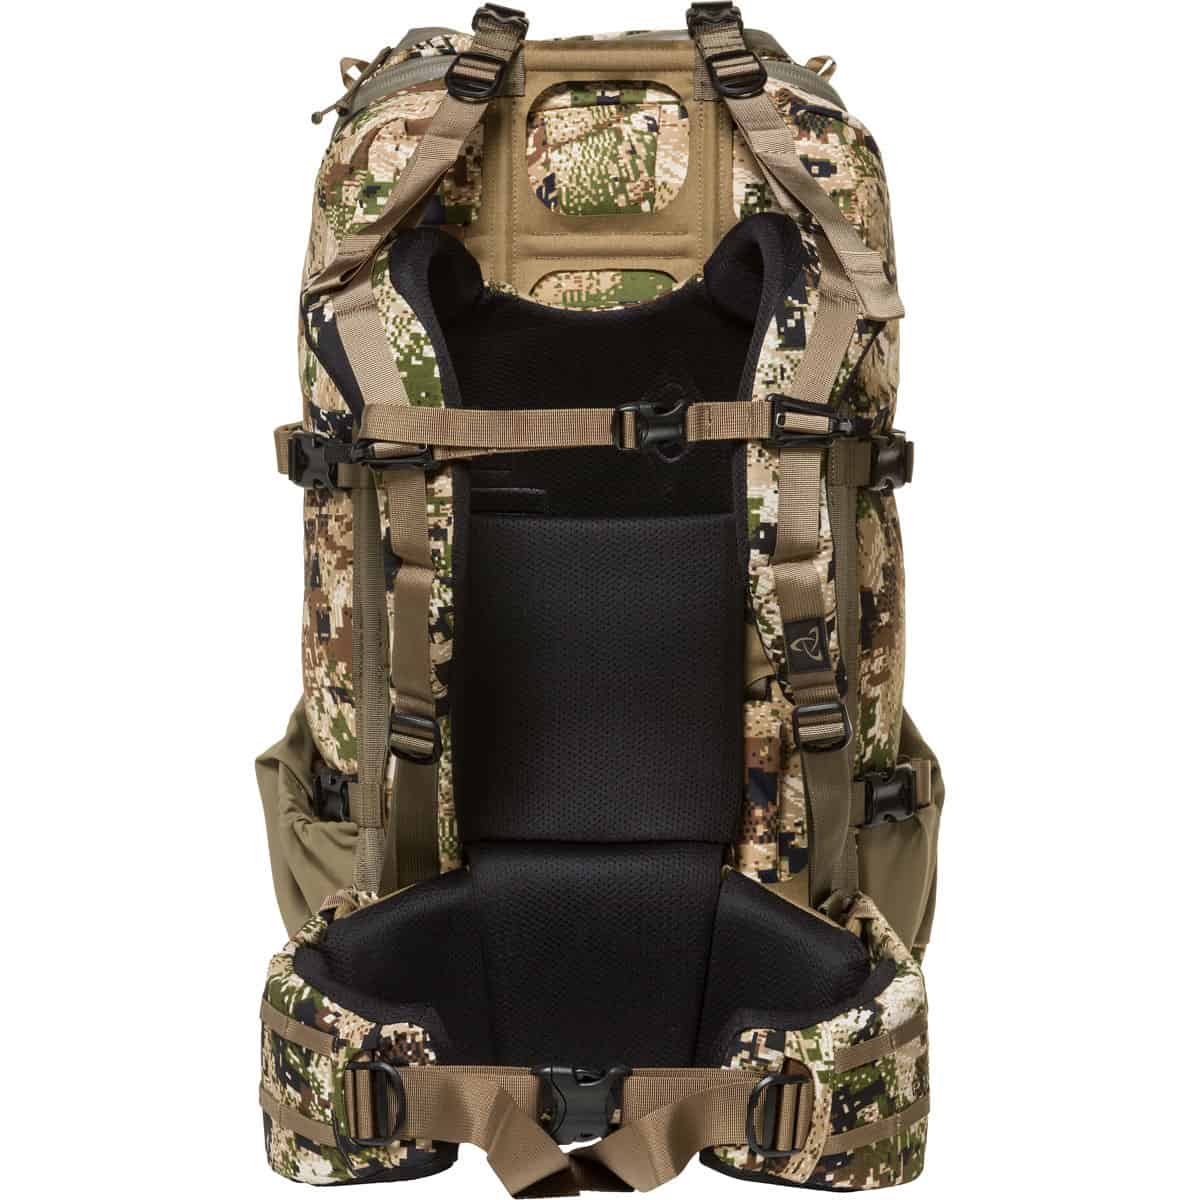 888564186343 110889 Mystery Ranch Sawtooth 45 Small Hunting Backpack optifade subalpine Back